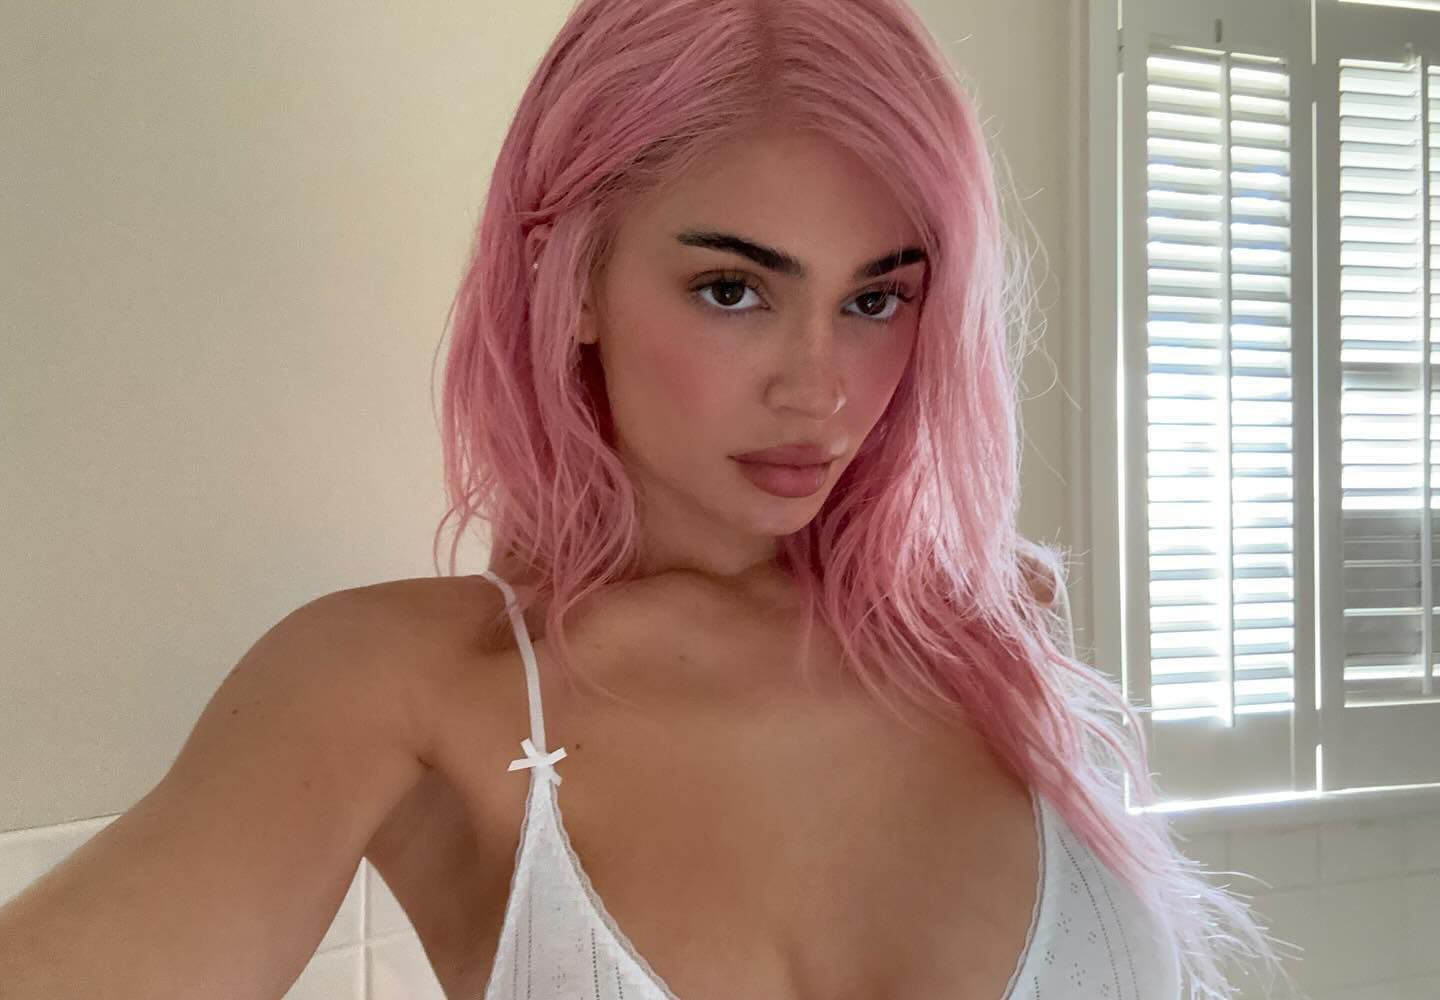 Kylie Jenner with pink hair